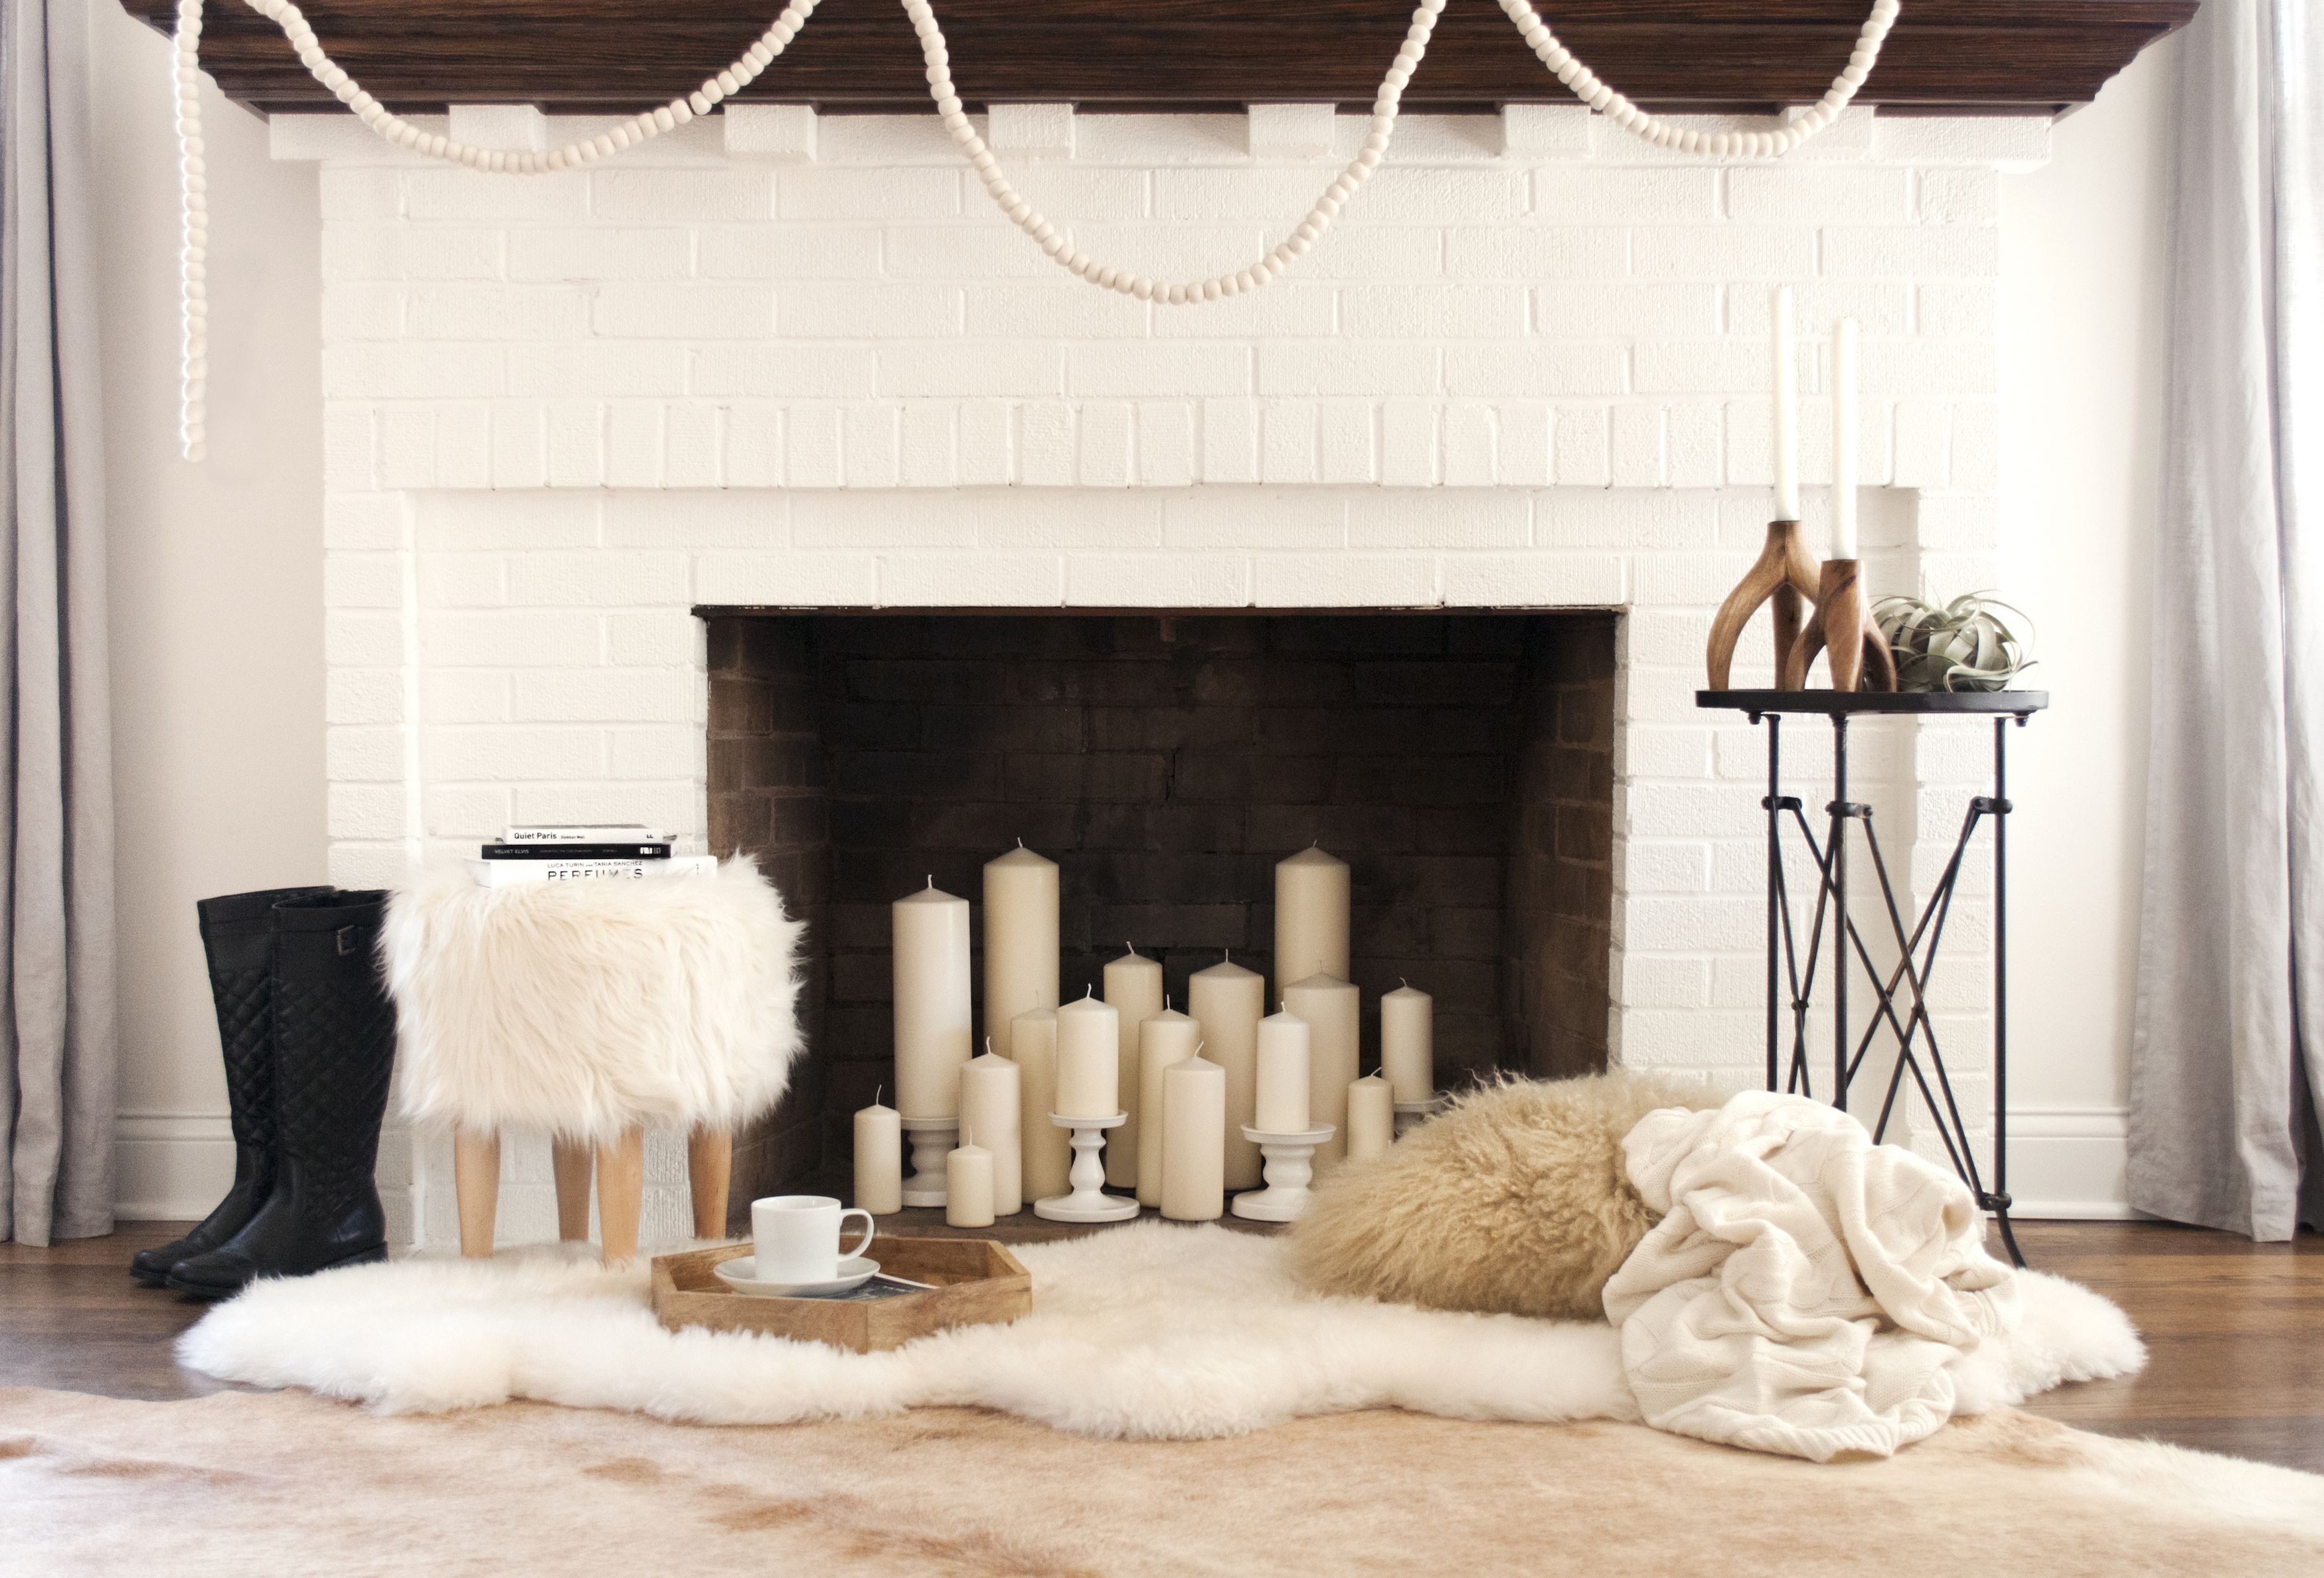 12 Decorating Ideas For Nonworking Fireplace Design - Living Room